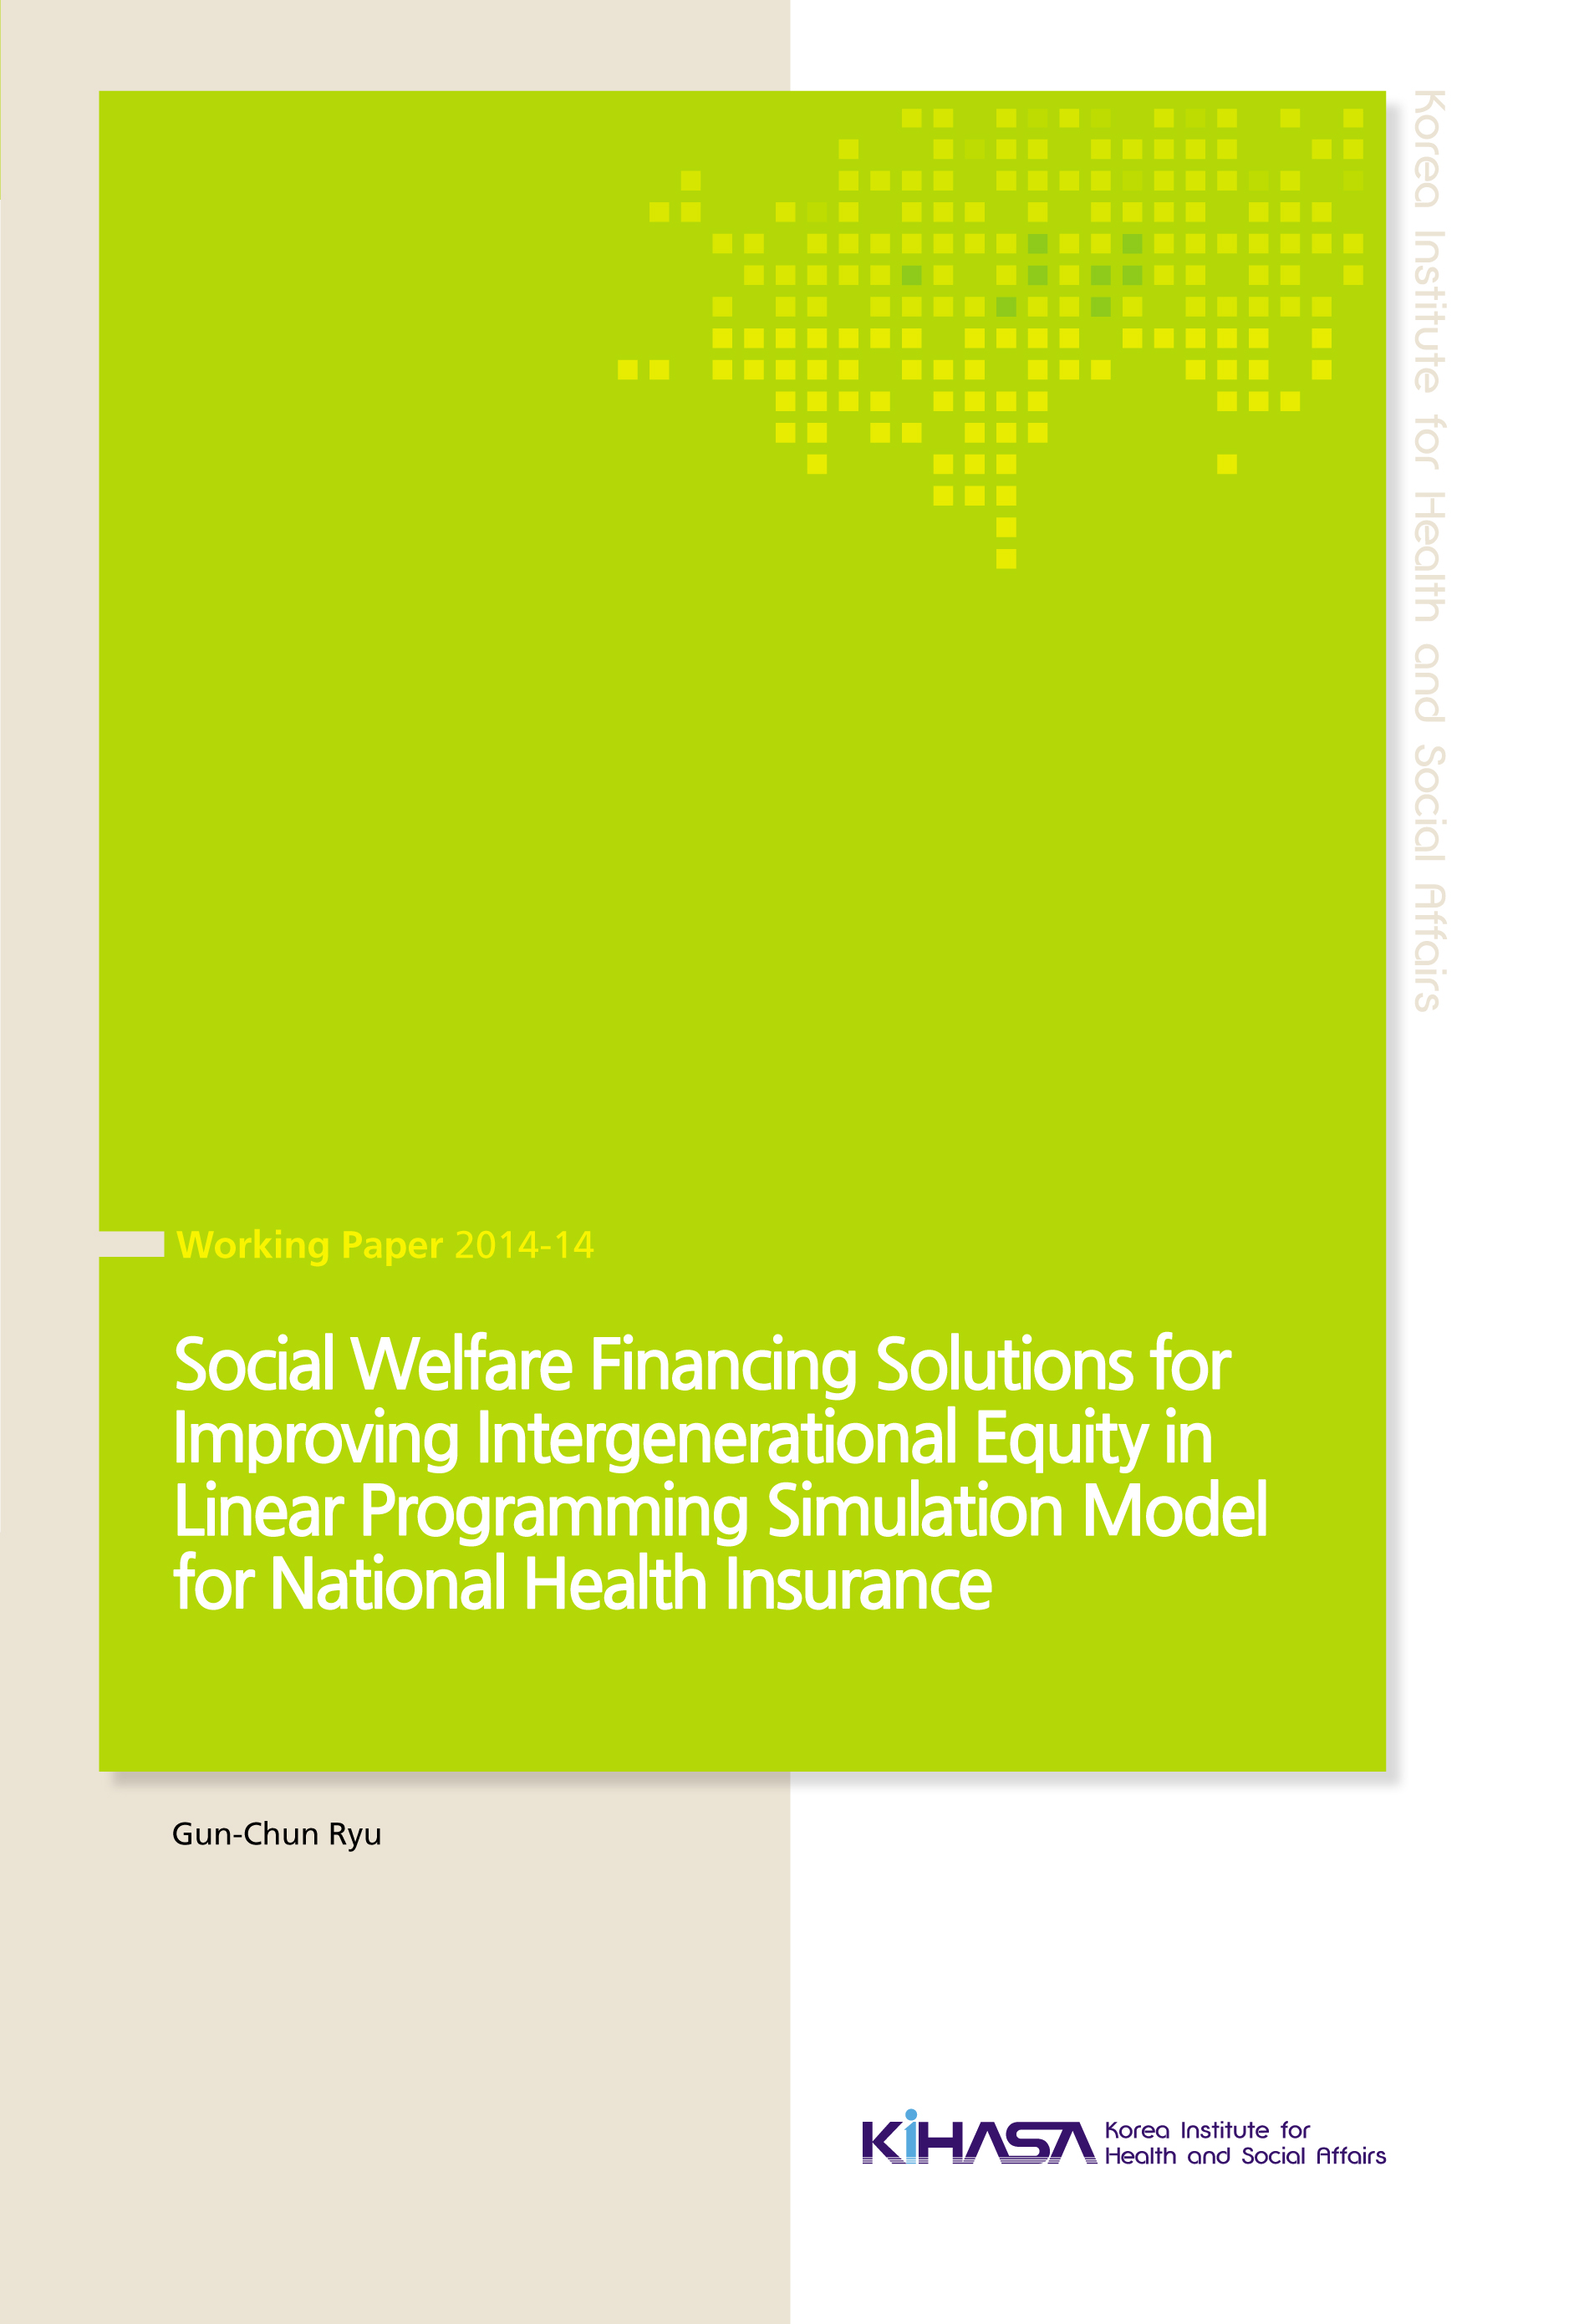 Social Welfare Financing Soutions for Improving Intergenerational Equity in Linear Programming Simulation Model for National ~